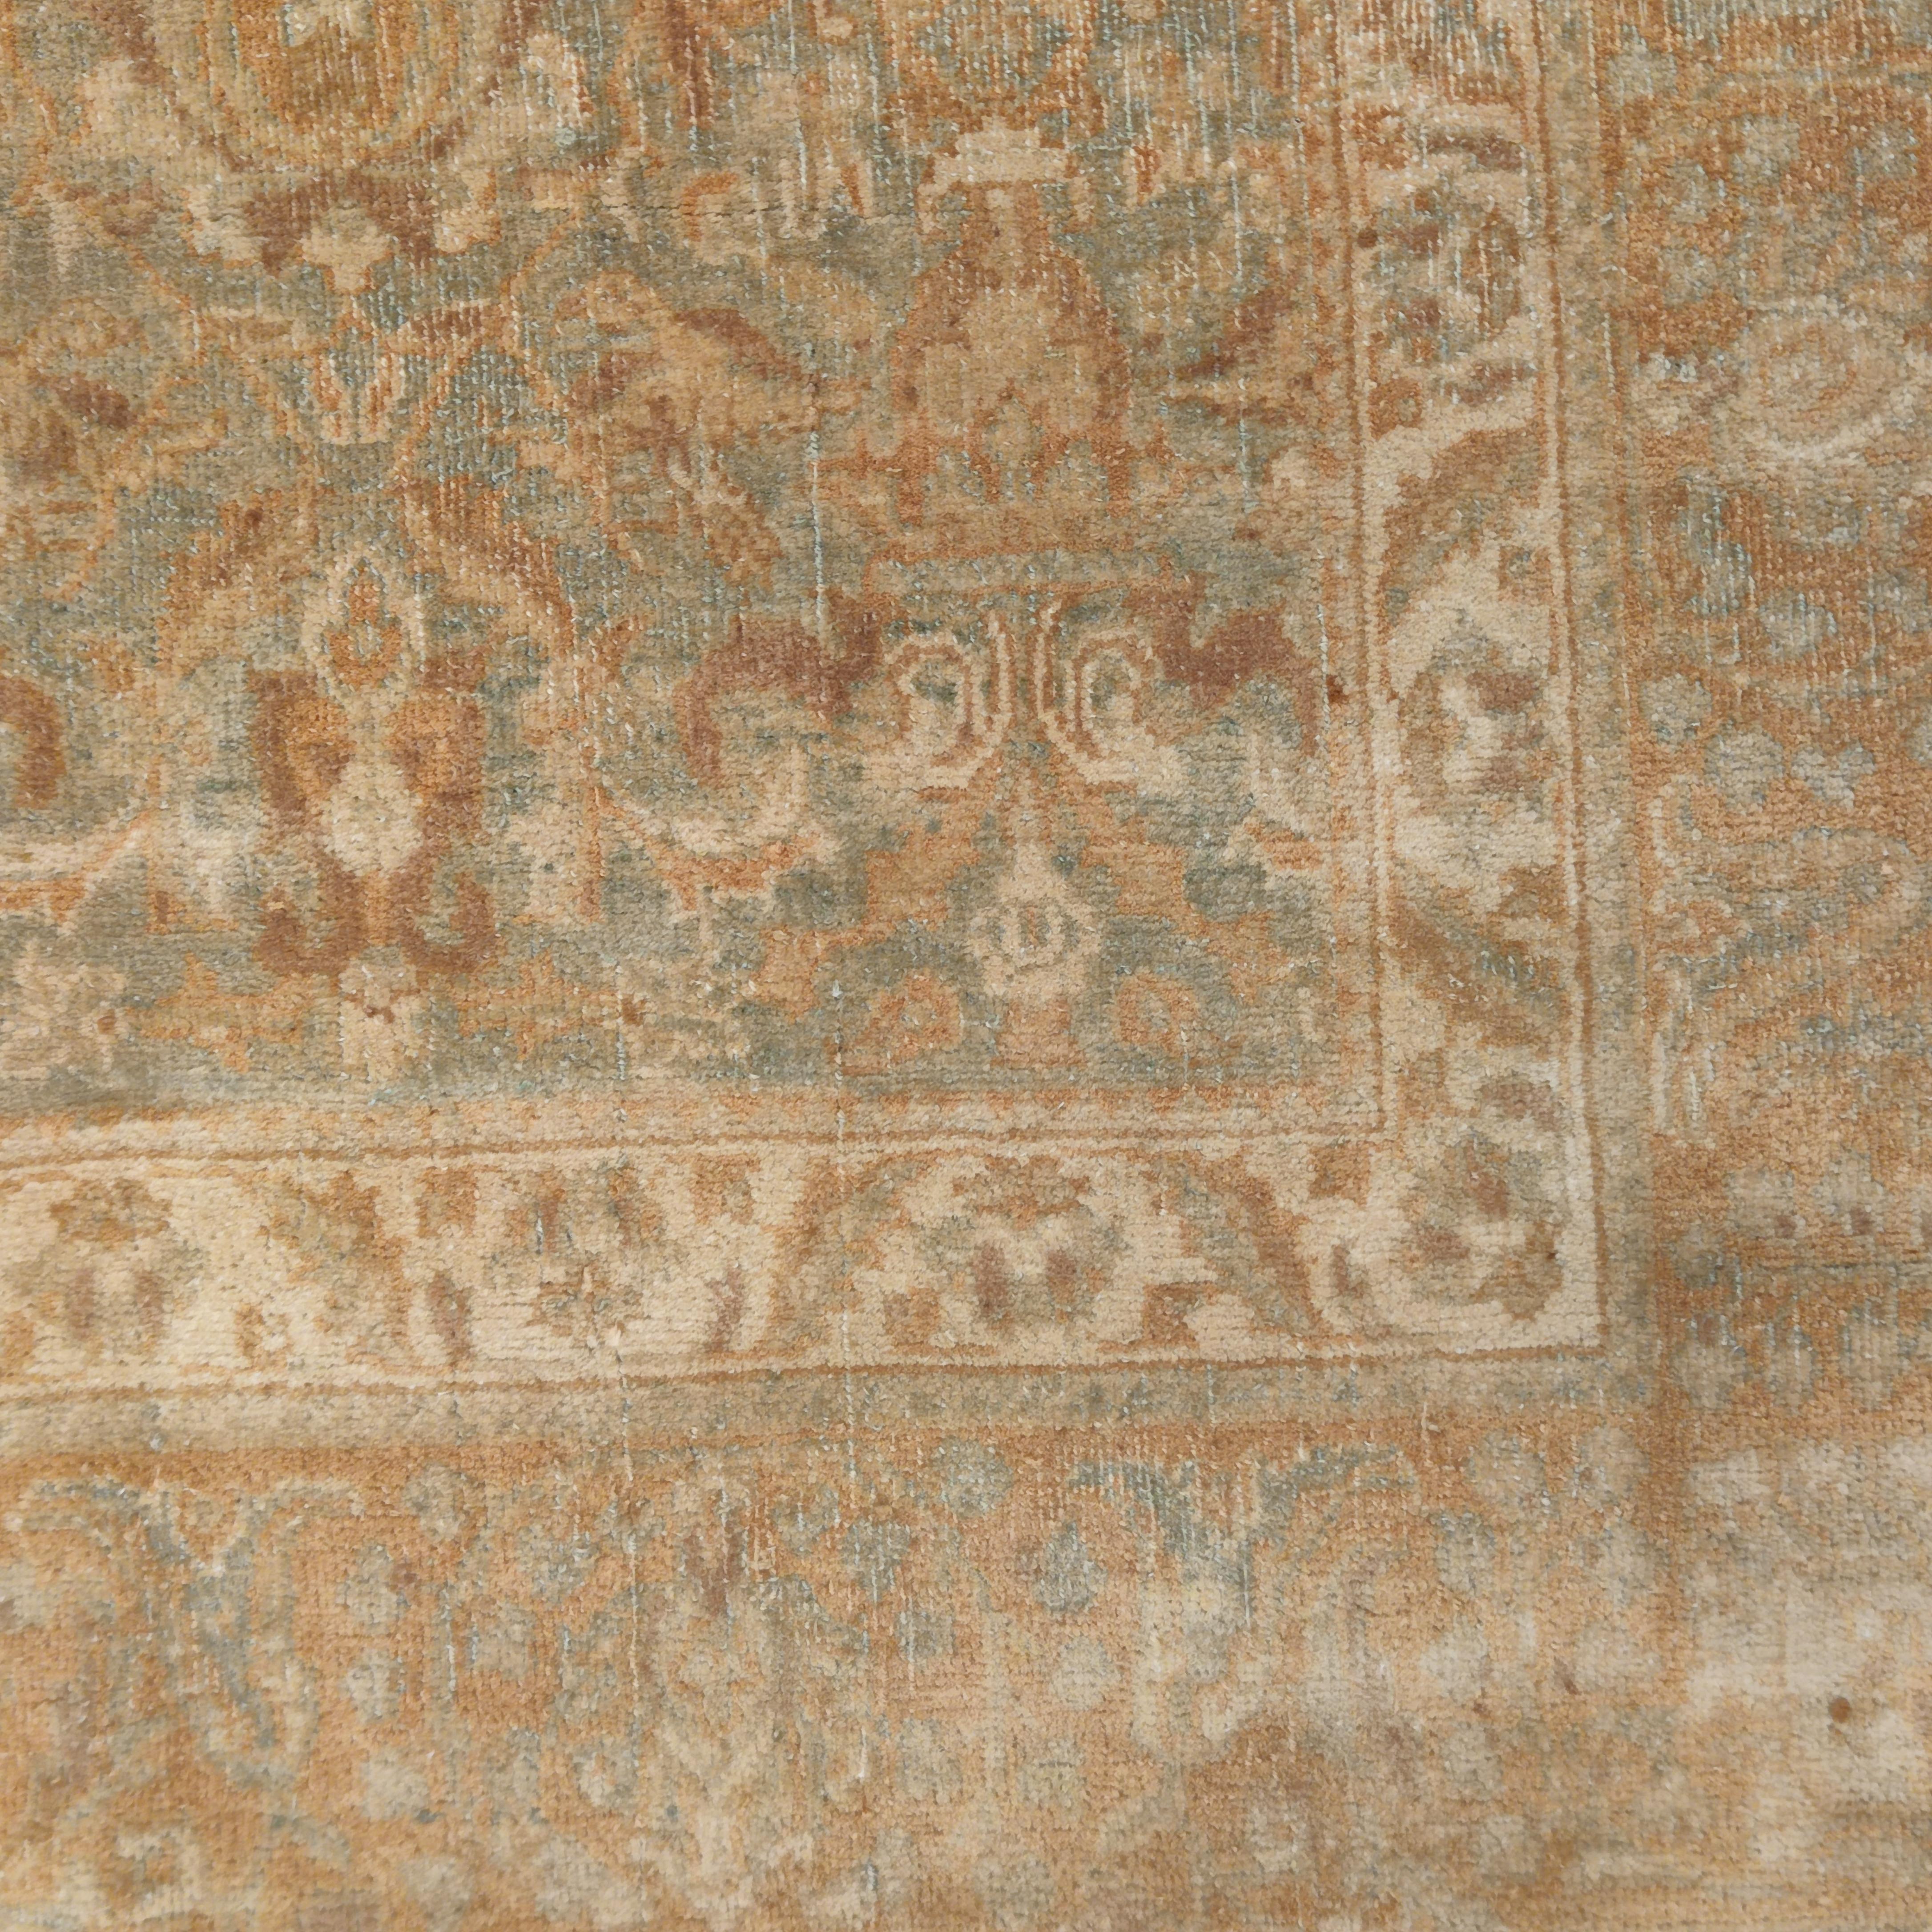 A finely knotted antique Agra rug distinguished by a soft, teal blue background embellished by various gradations of colour, and decorated by an infinite repeat 'herati' pattern. The restrained palette used in this rare small Agra gives it a